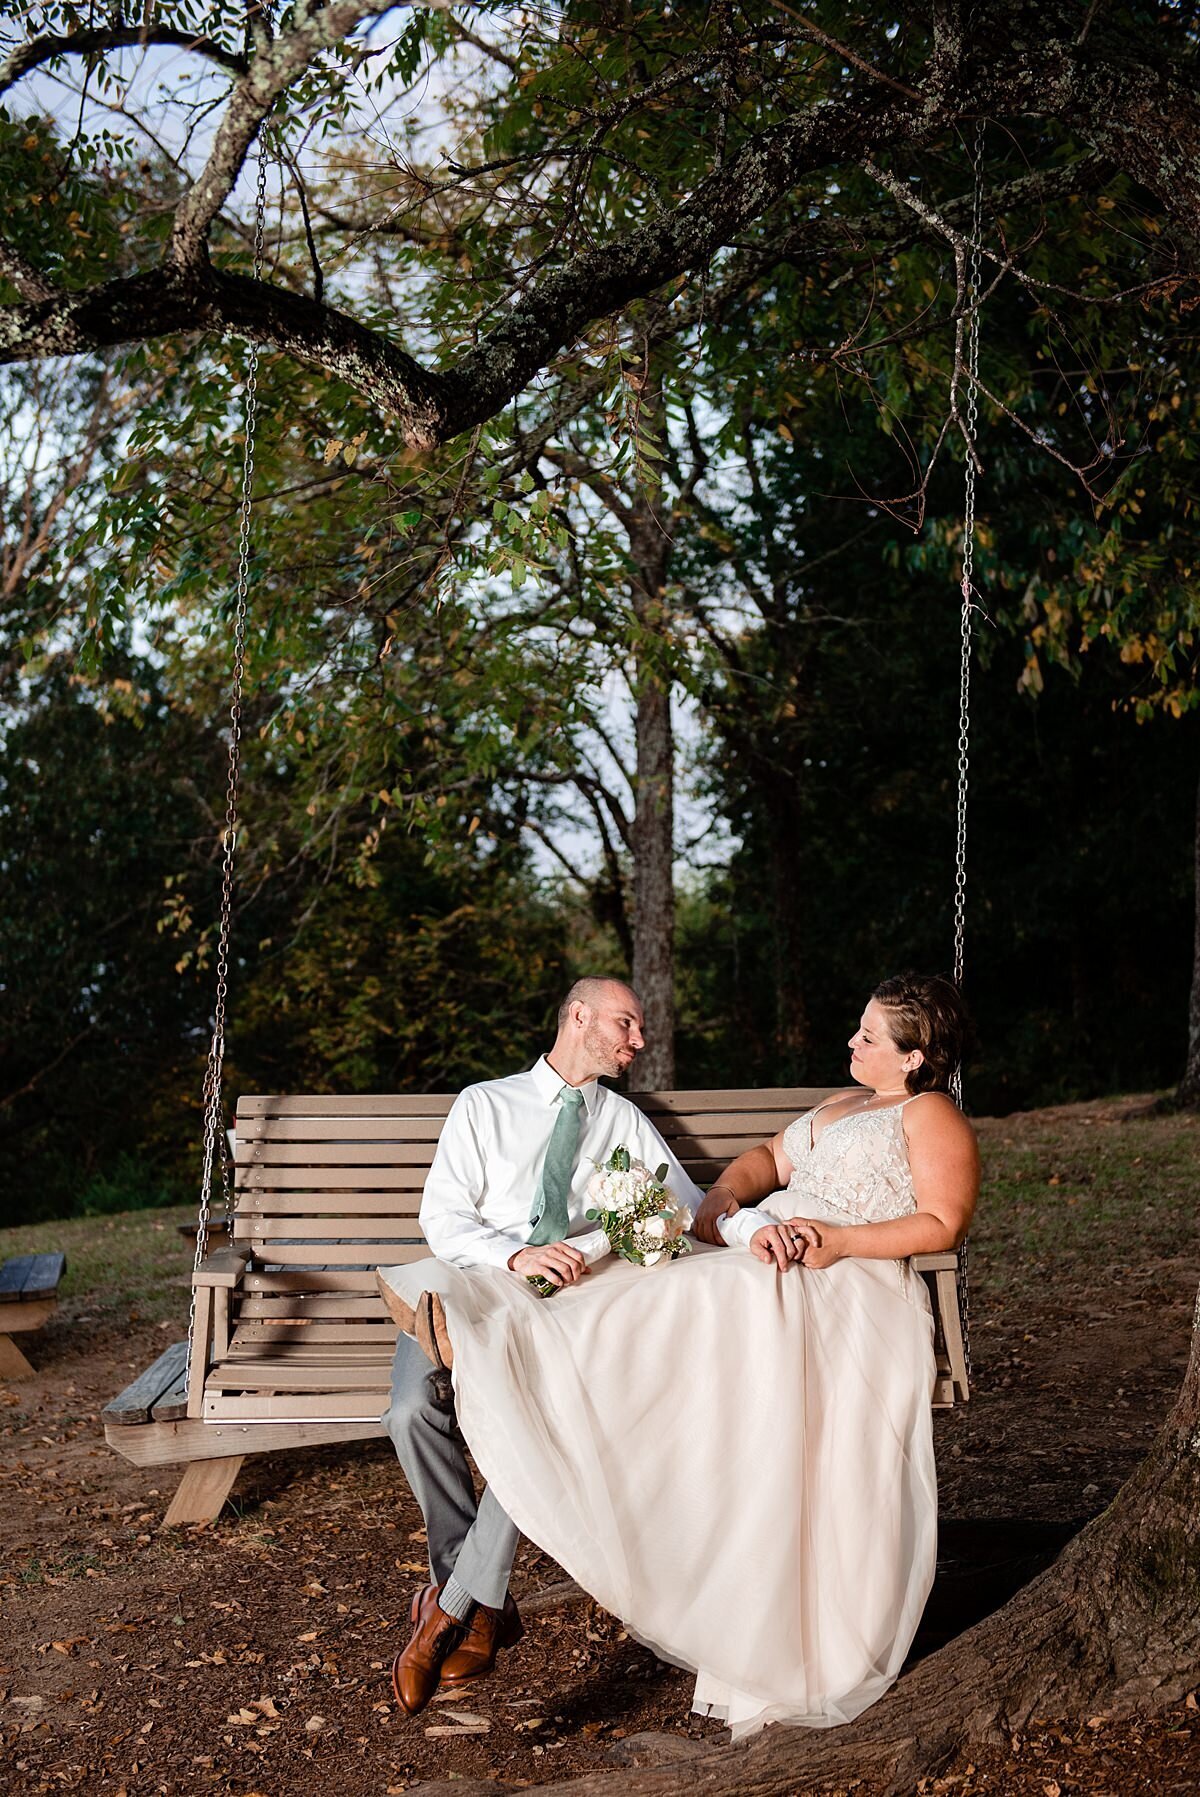 The groom sits on a wooden swing suspended from a tree as he slowly rocks the bride back and forth. The bride sits with her feet up on the groom's lap with her back to the side of the swing her heavy satin wedding dress spilling down to the ground. The brides dress is sleeveless with a fitted bodice. The groom is wearing gray pants with a white shirt and a light gray tie.